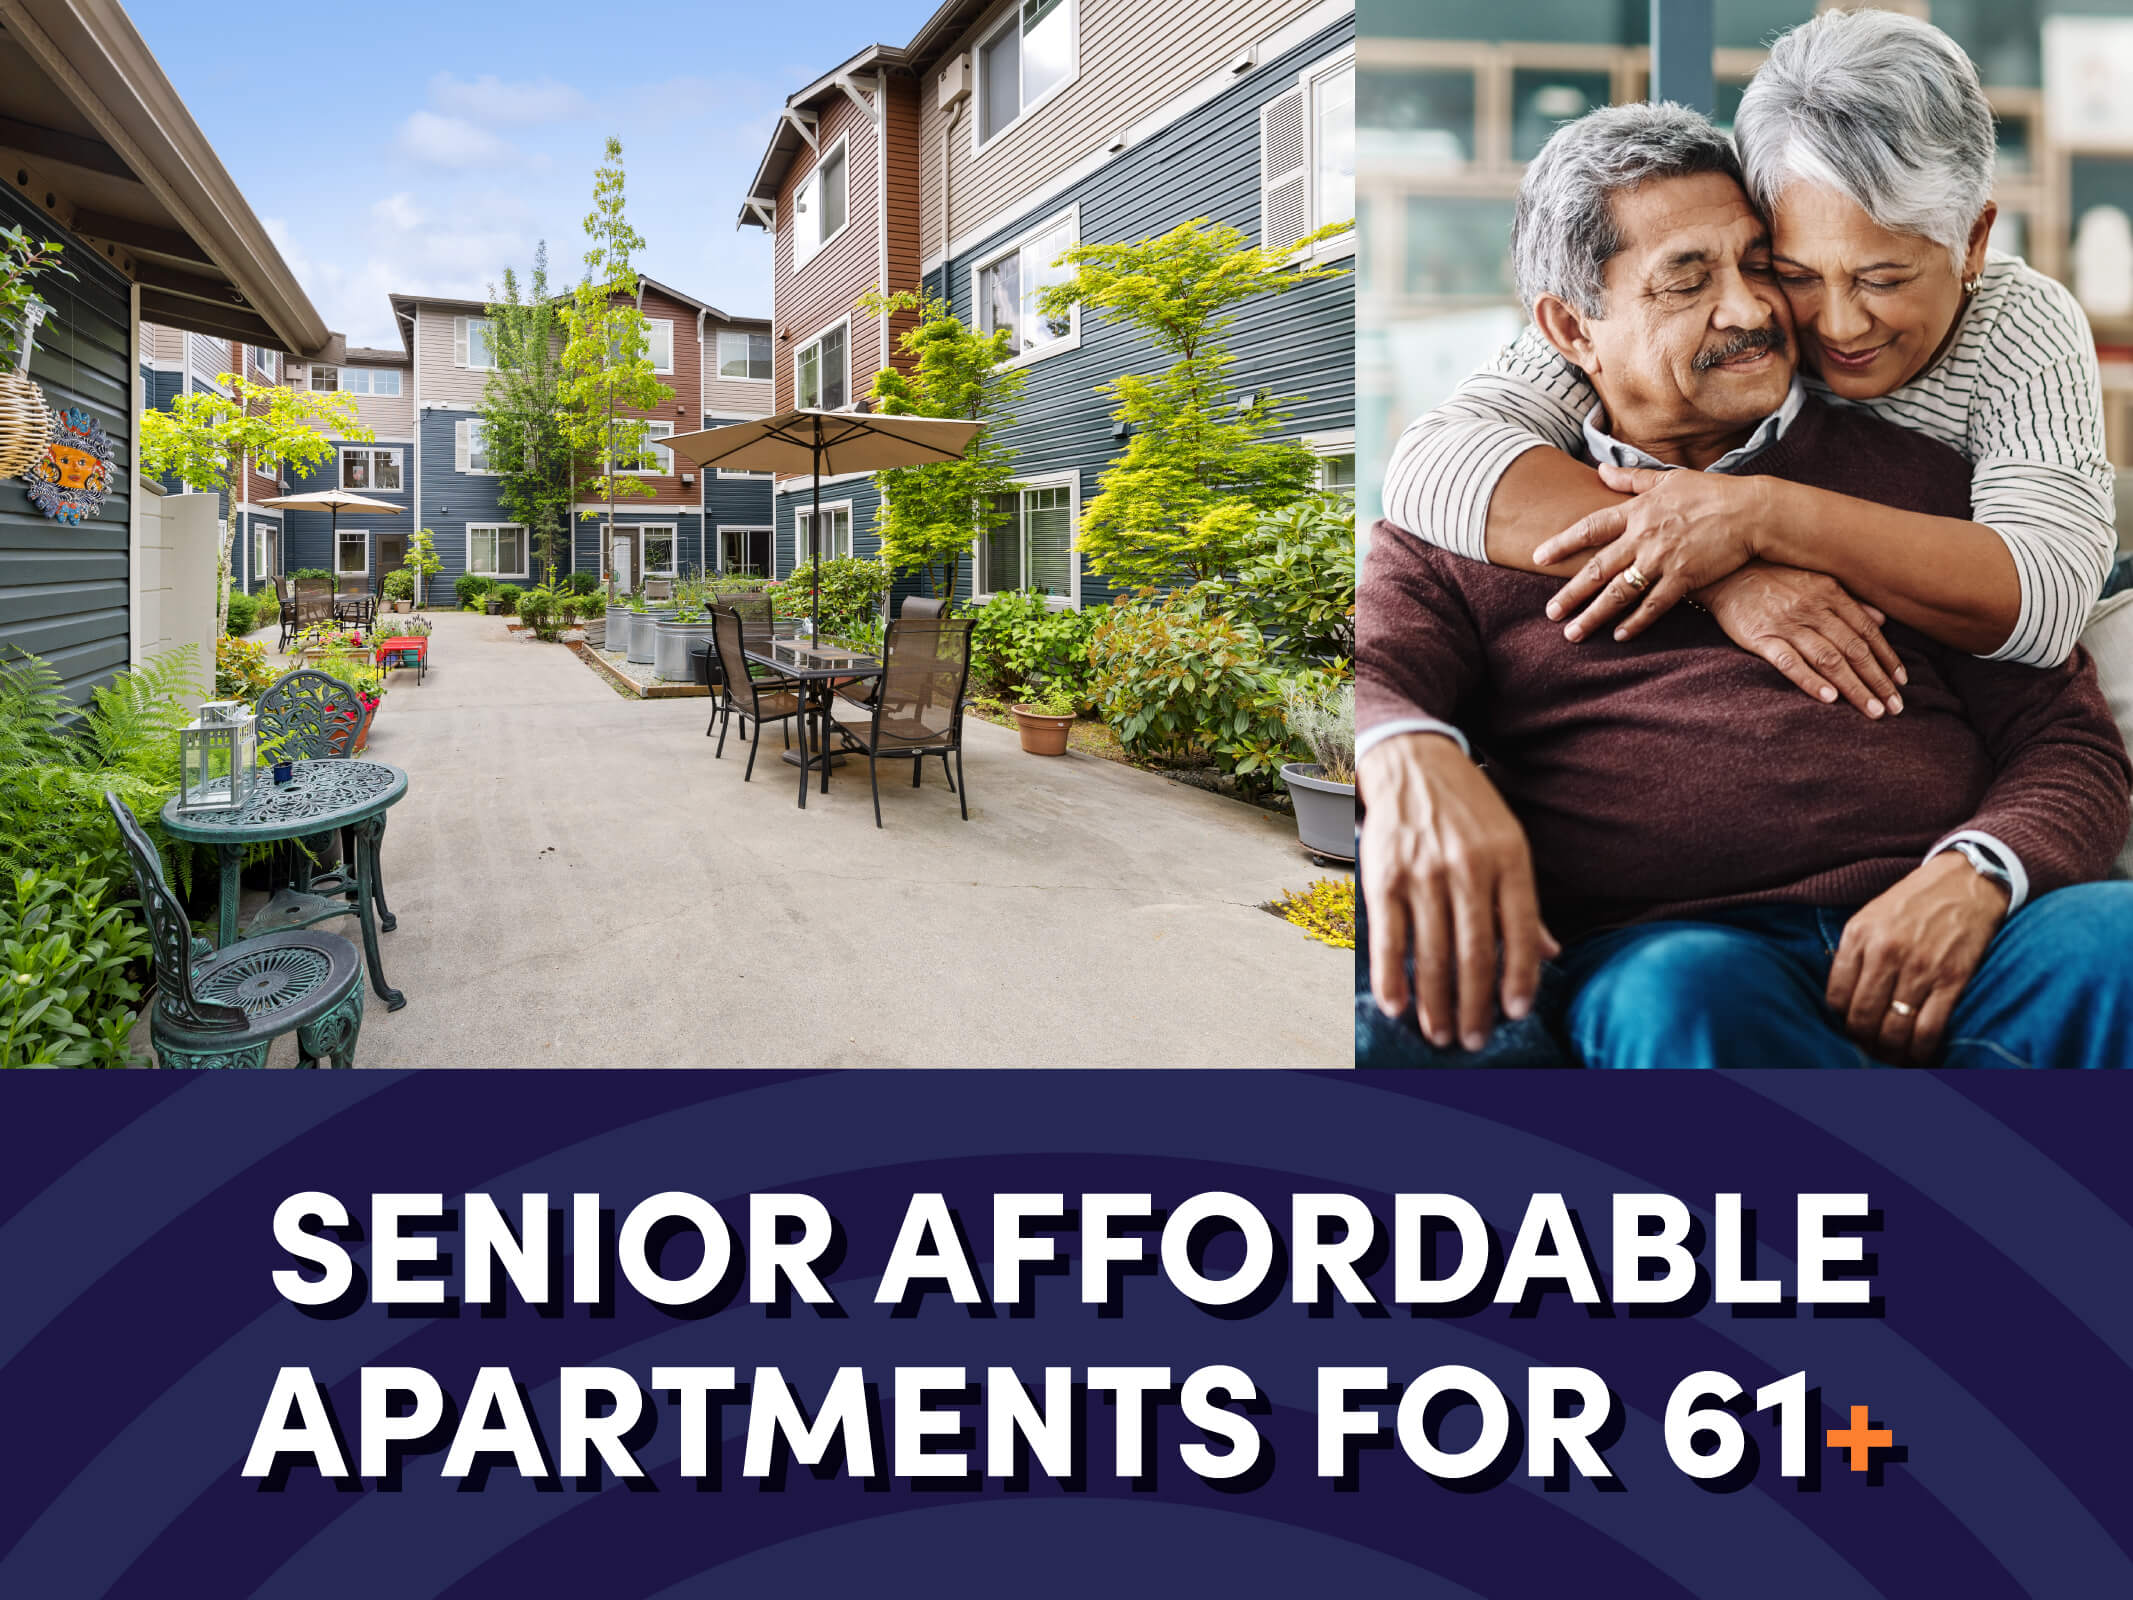 An image of a building’s courtyard next to an image of a senior couple hugging above text that reads “Senior Affordable Apartments for 61+” Ballinger Court Senior Affordable Apartments in Edmonds, Washington.